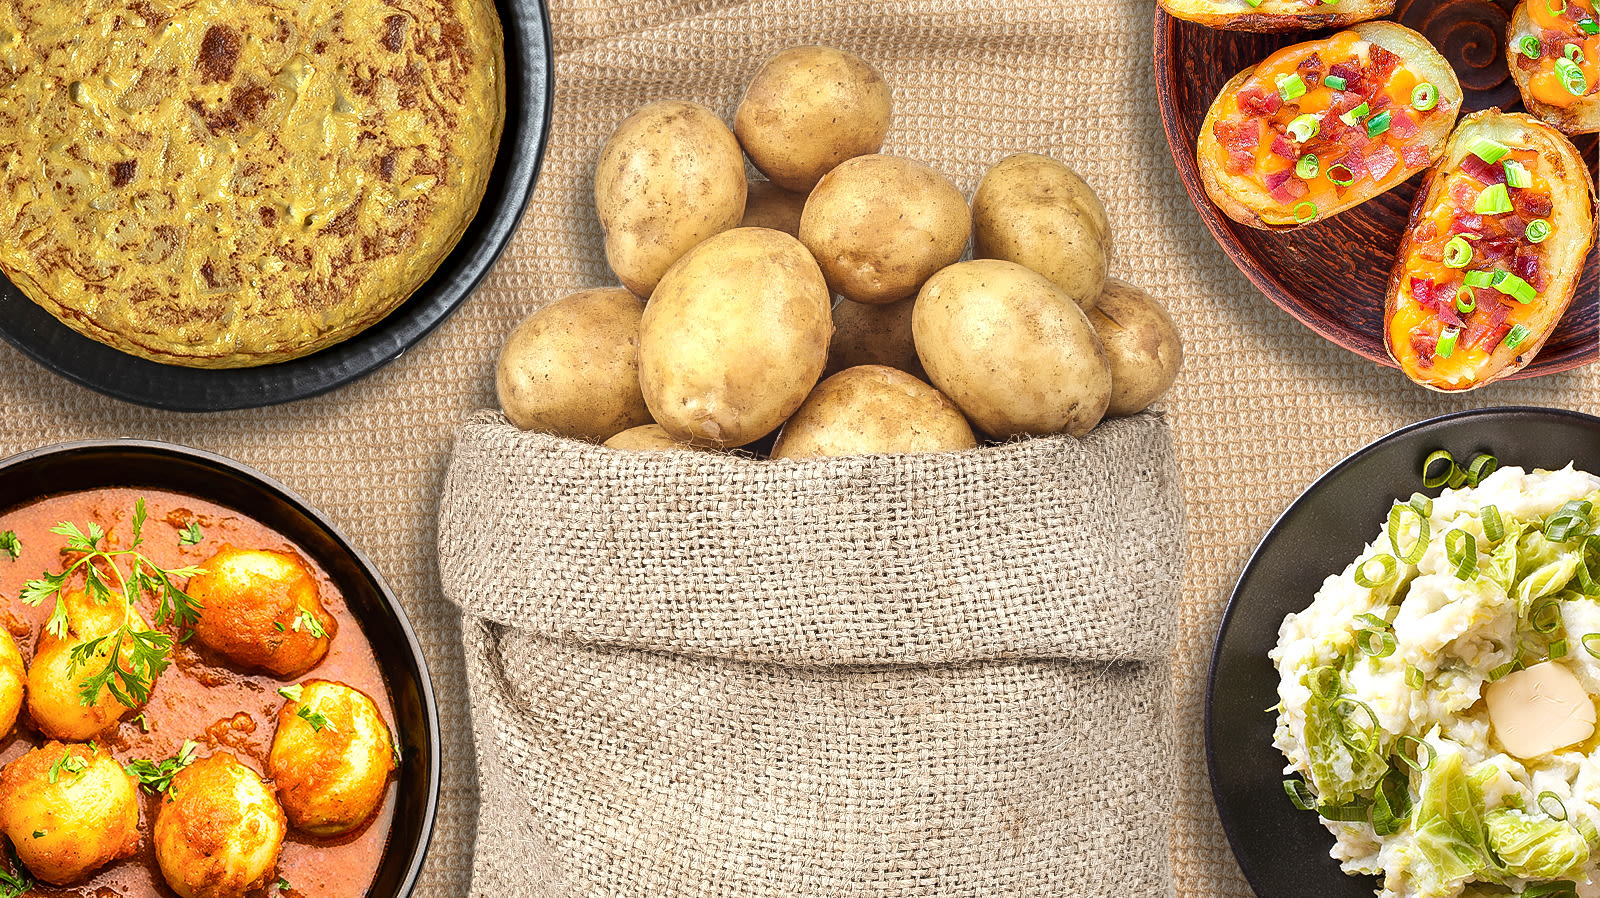 20 Different Ways To Use Up A Big Bag Of Potatoes